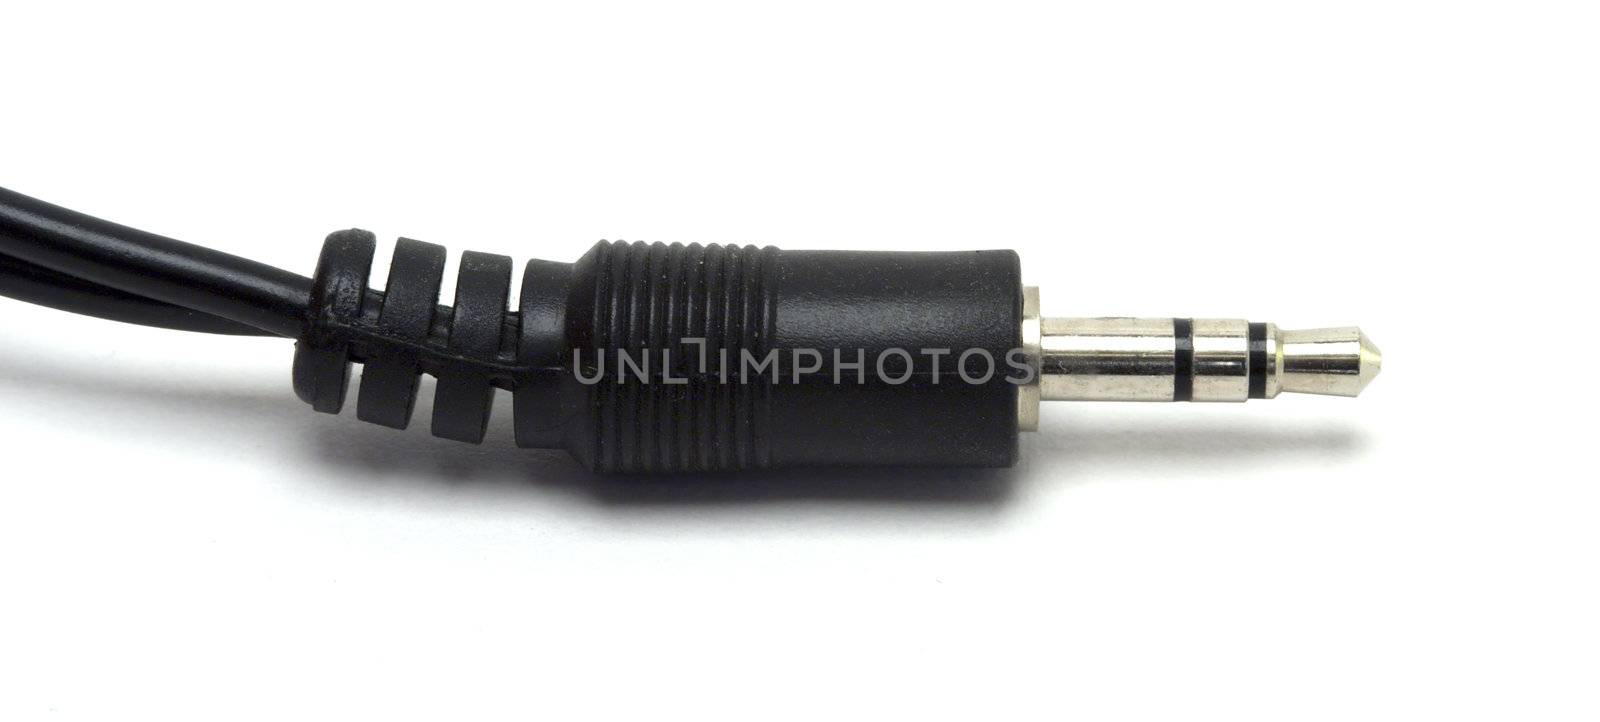 Closeup, isolated shot of a 1/8 stereo cable against a white background.